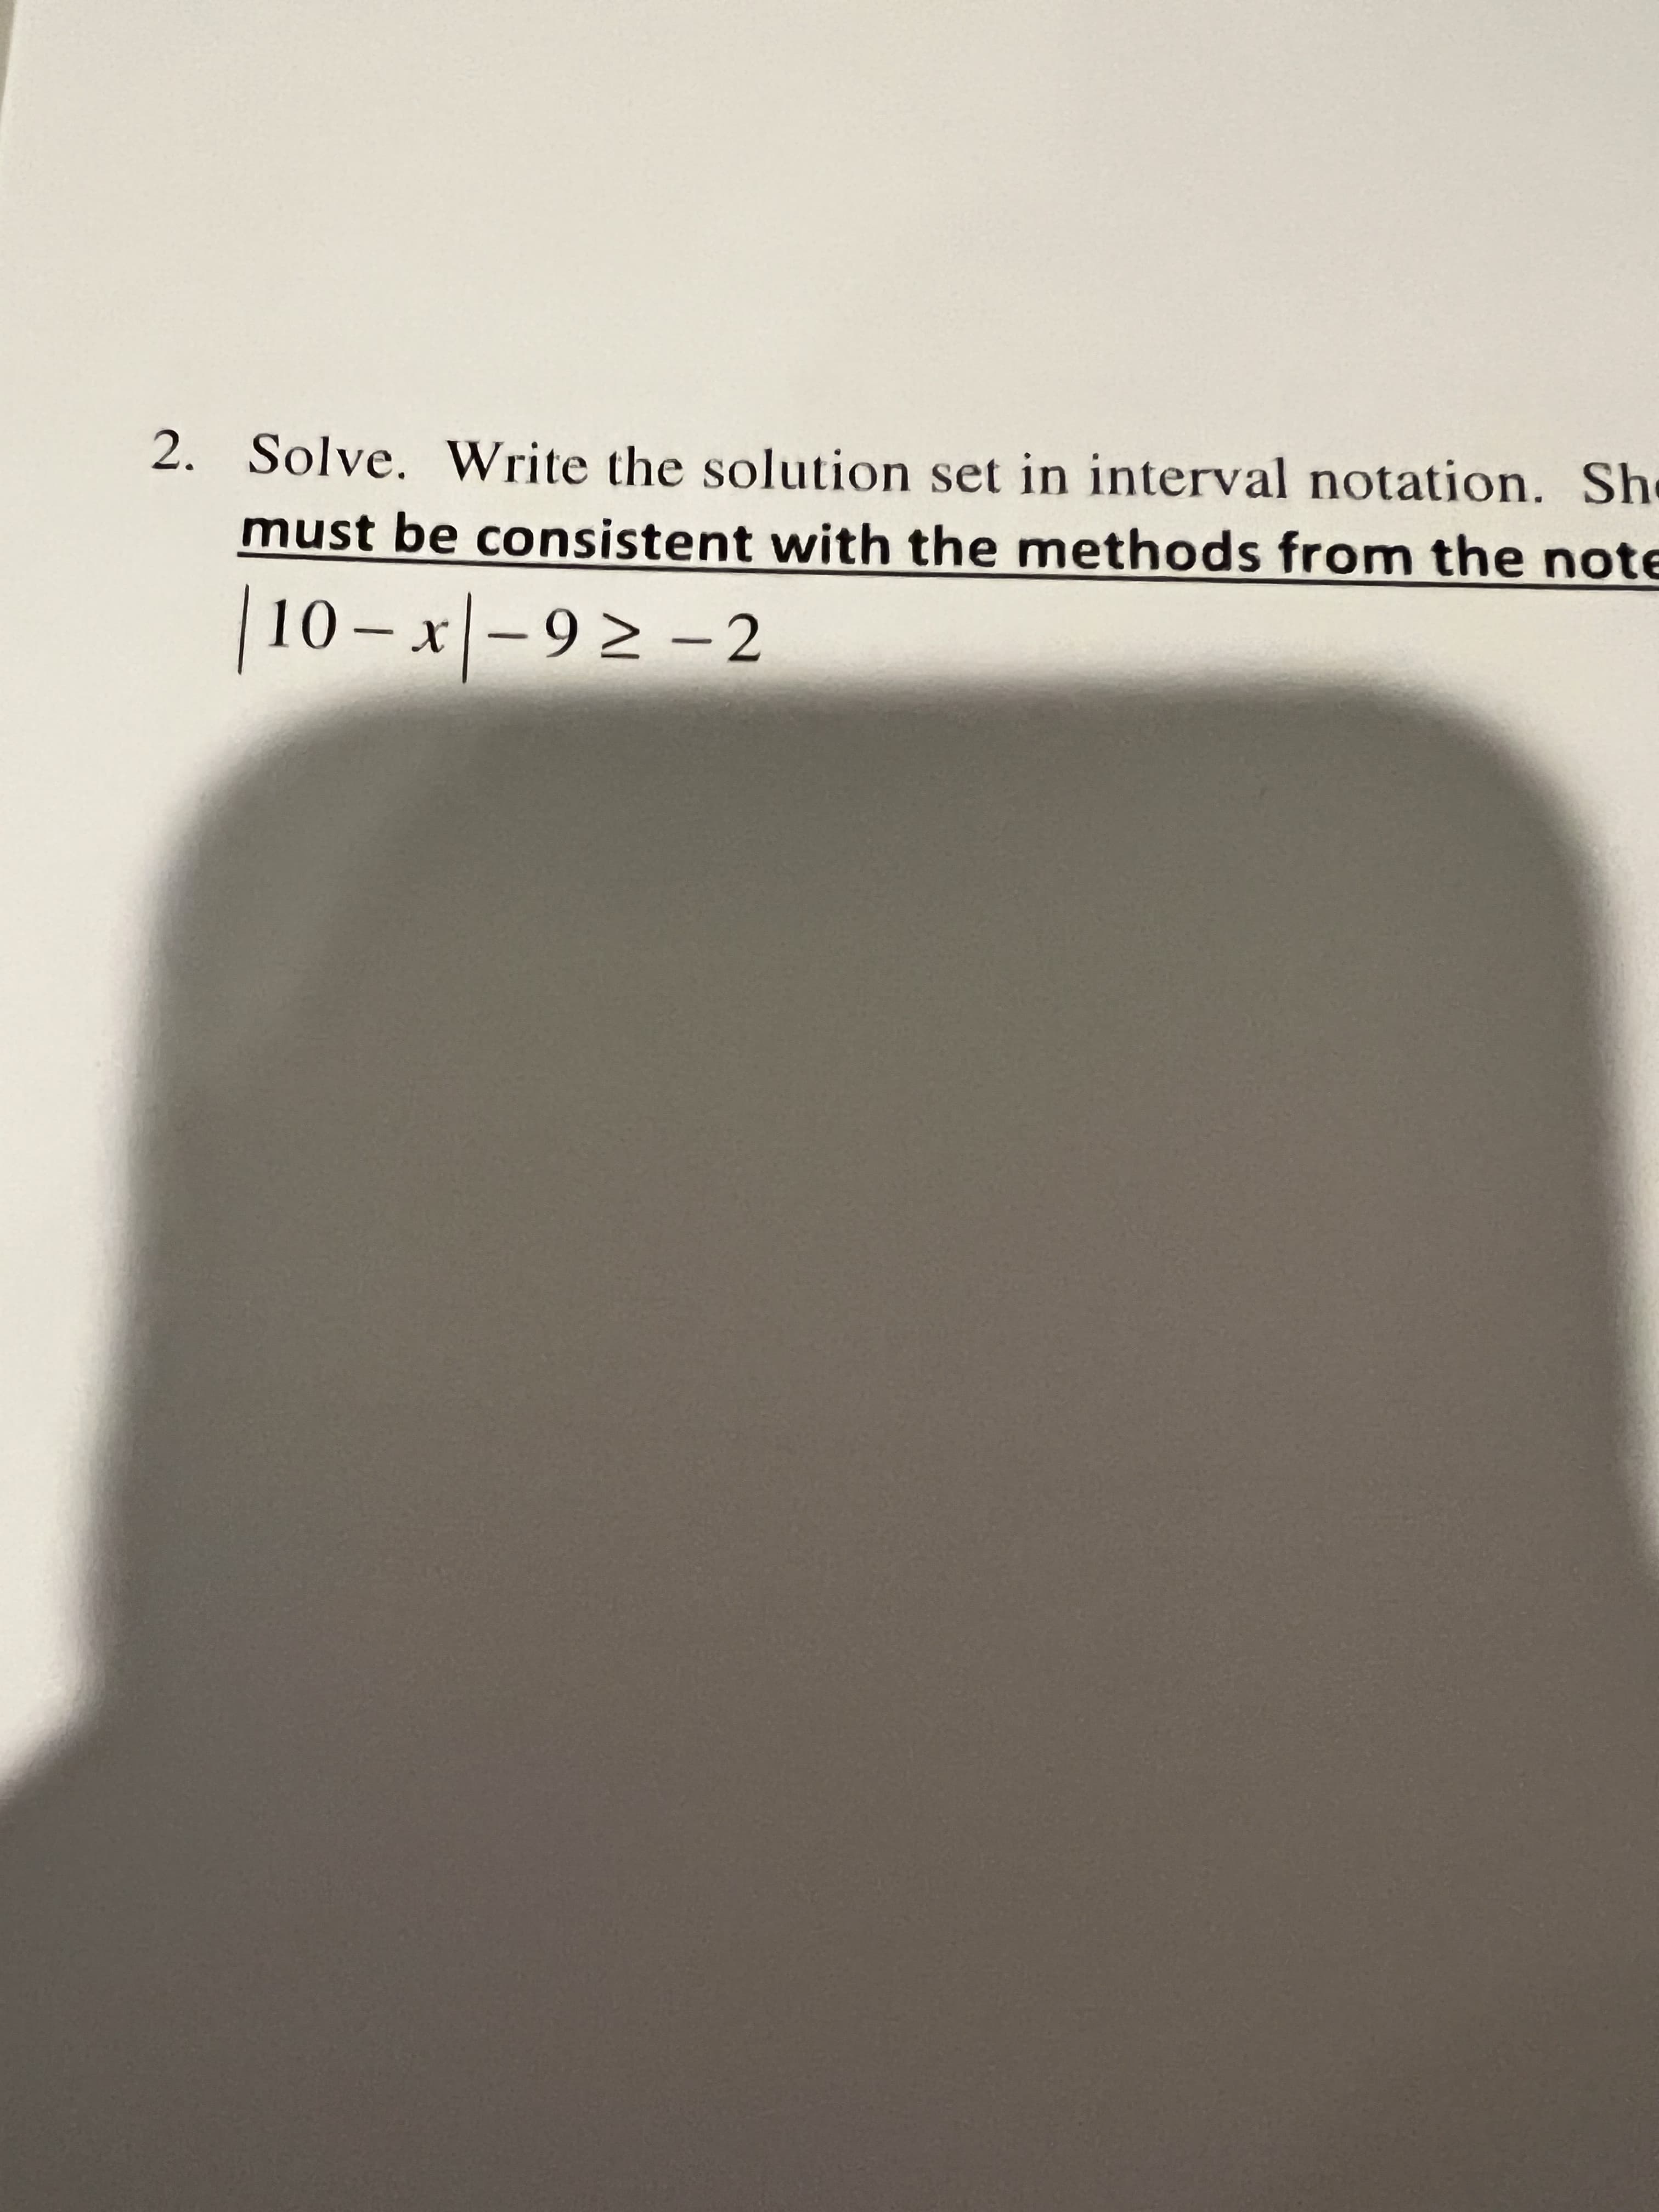 2. Solve. Write the solution set in interval notation. She
must be consistent with the methods from the note
10- x-92 -2
